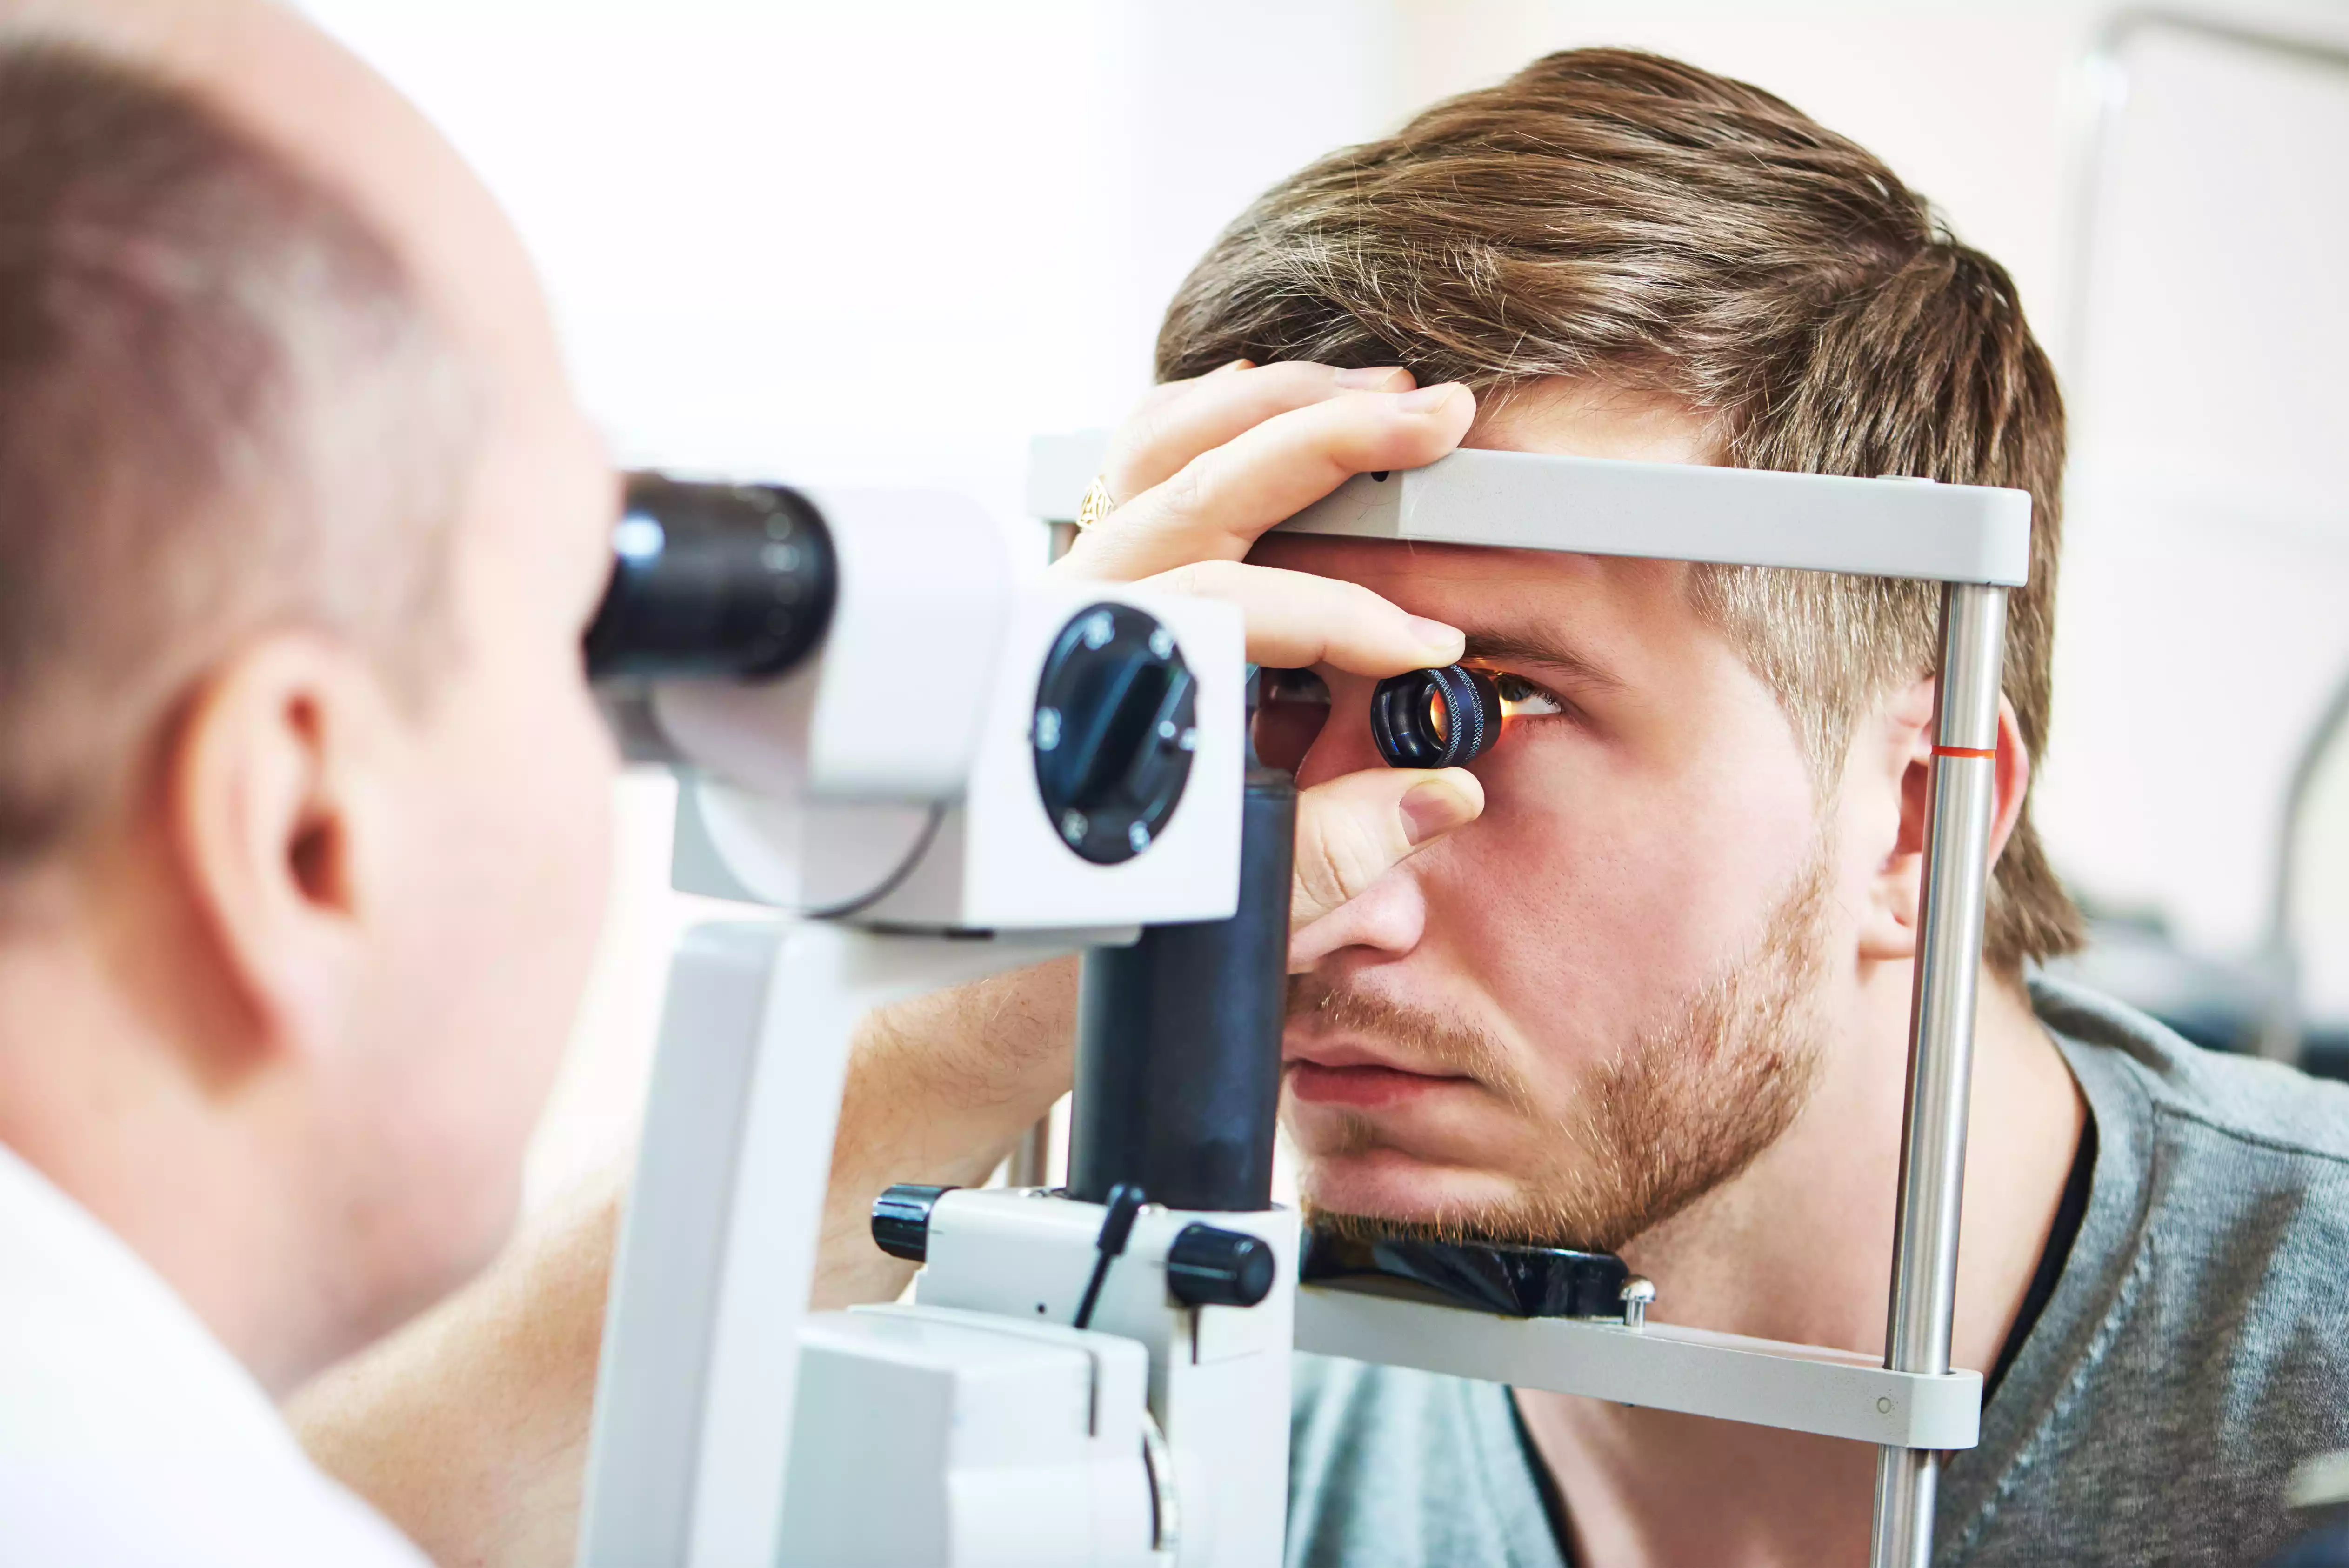 Why Do Our Eyes Deteriorate? What are Eye Diseases? What should we do to prevent our eye health from deteriorating? Common Misconceptions About the Eye